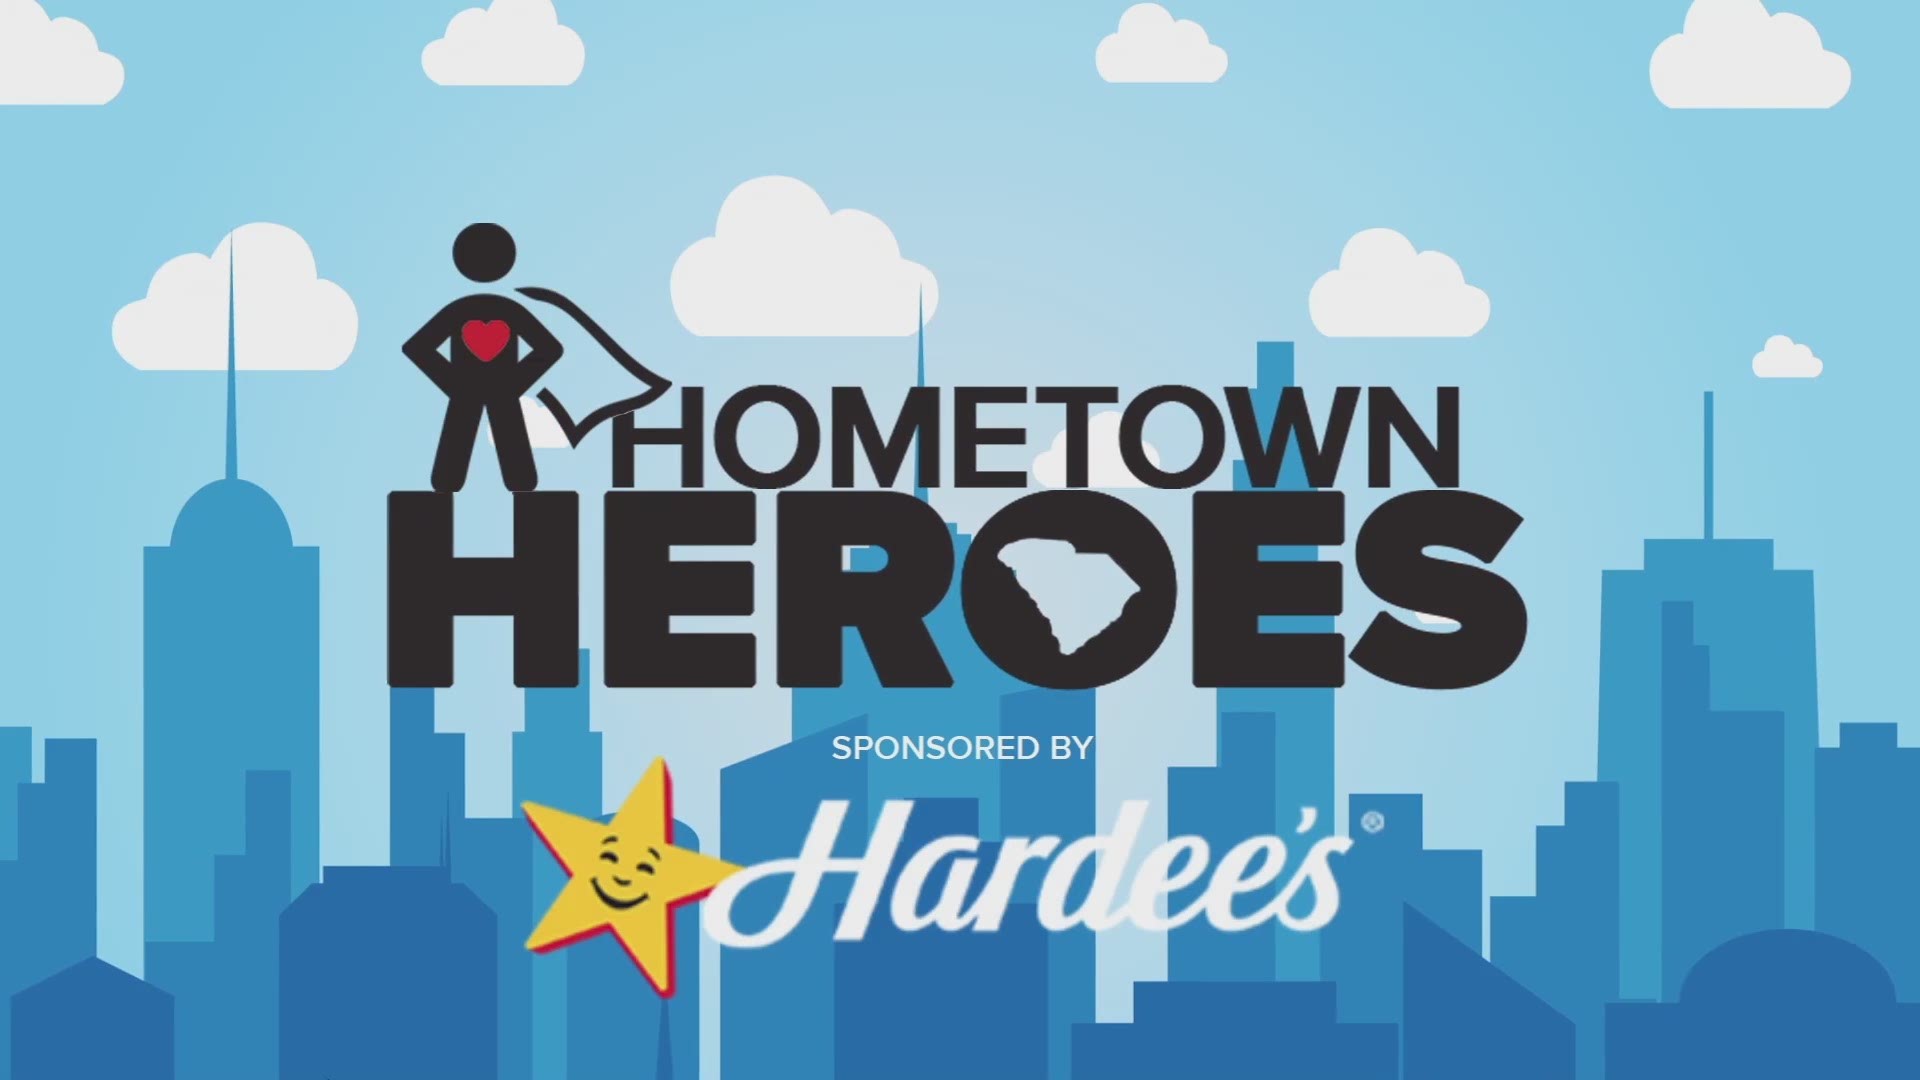 Hometown Heroes! They’re the special people in our community who make a big difference.